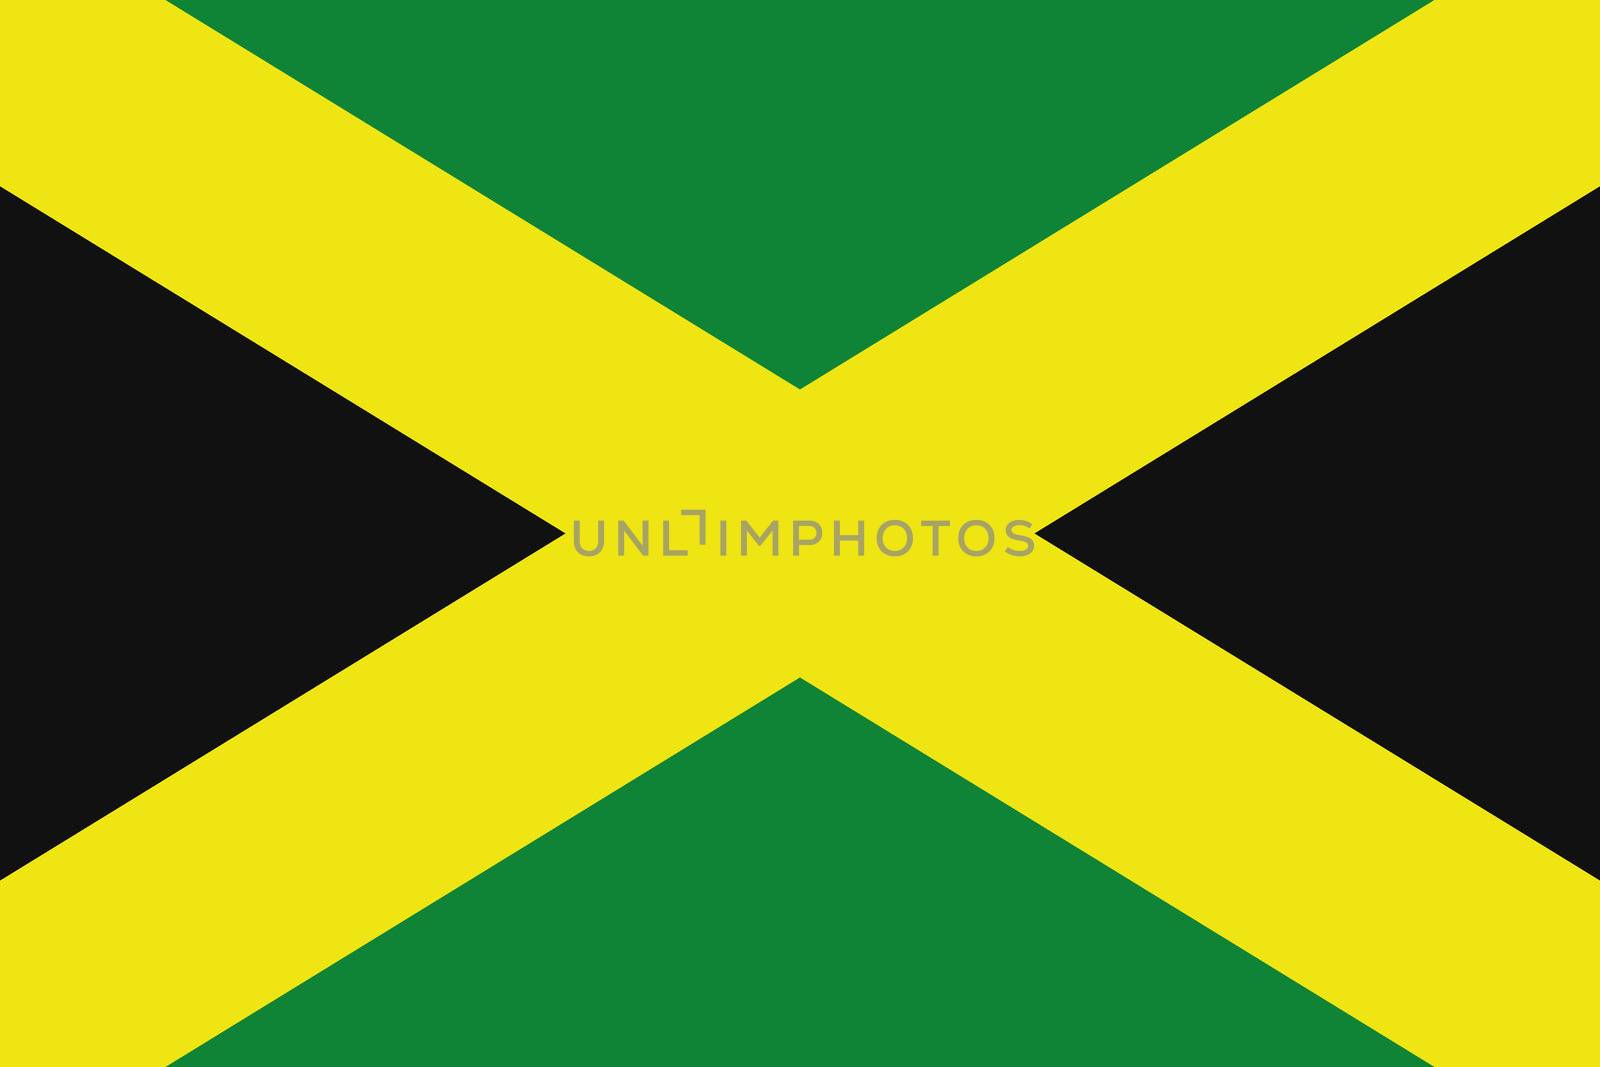 An illustration of the flag of Jamaica